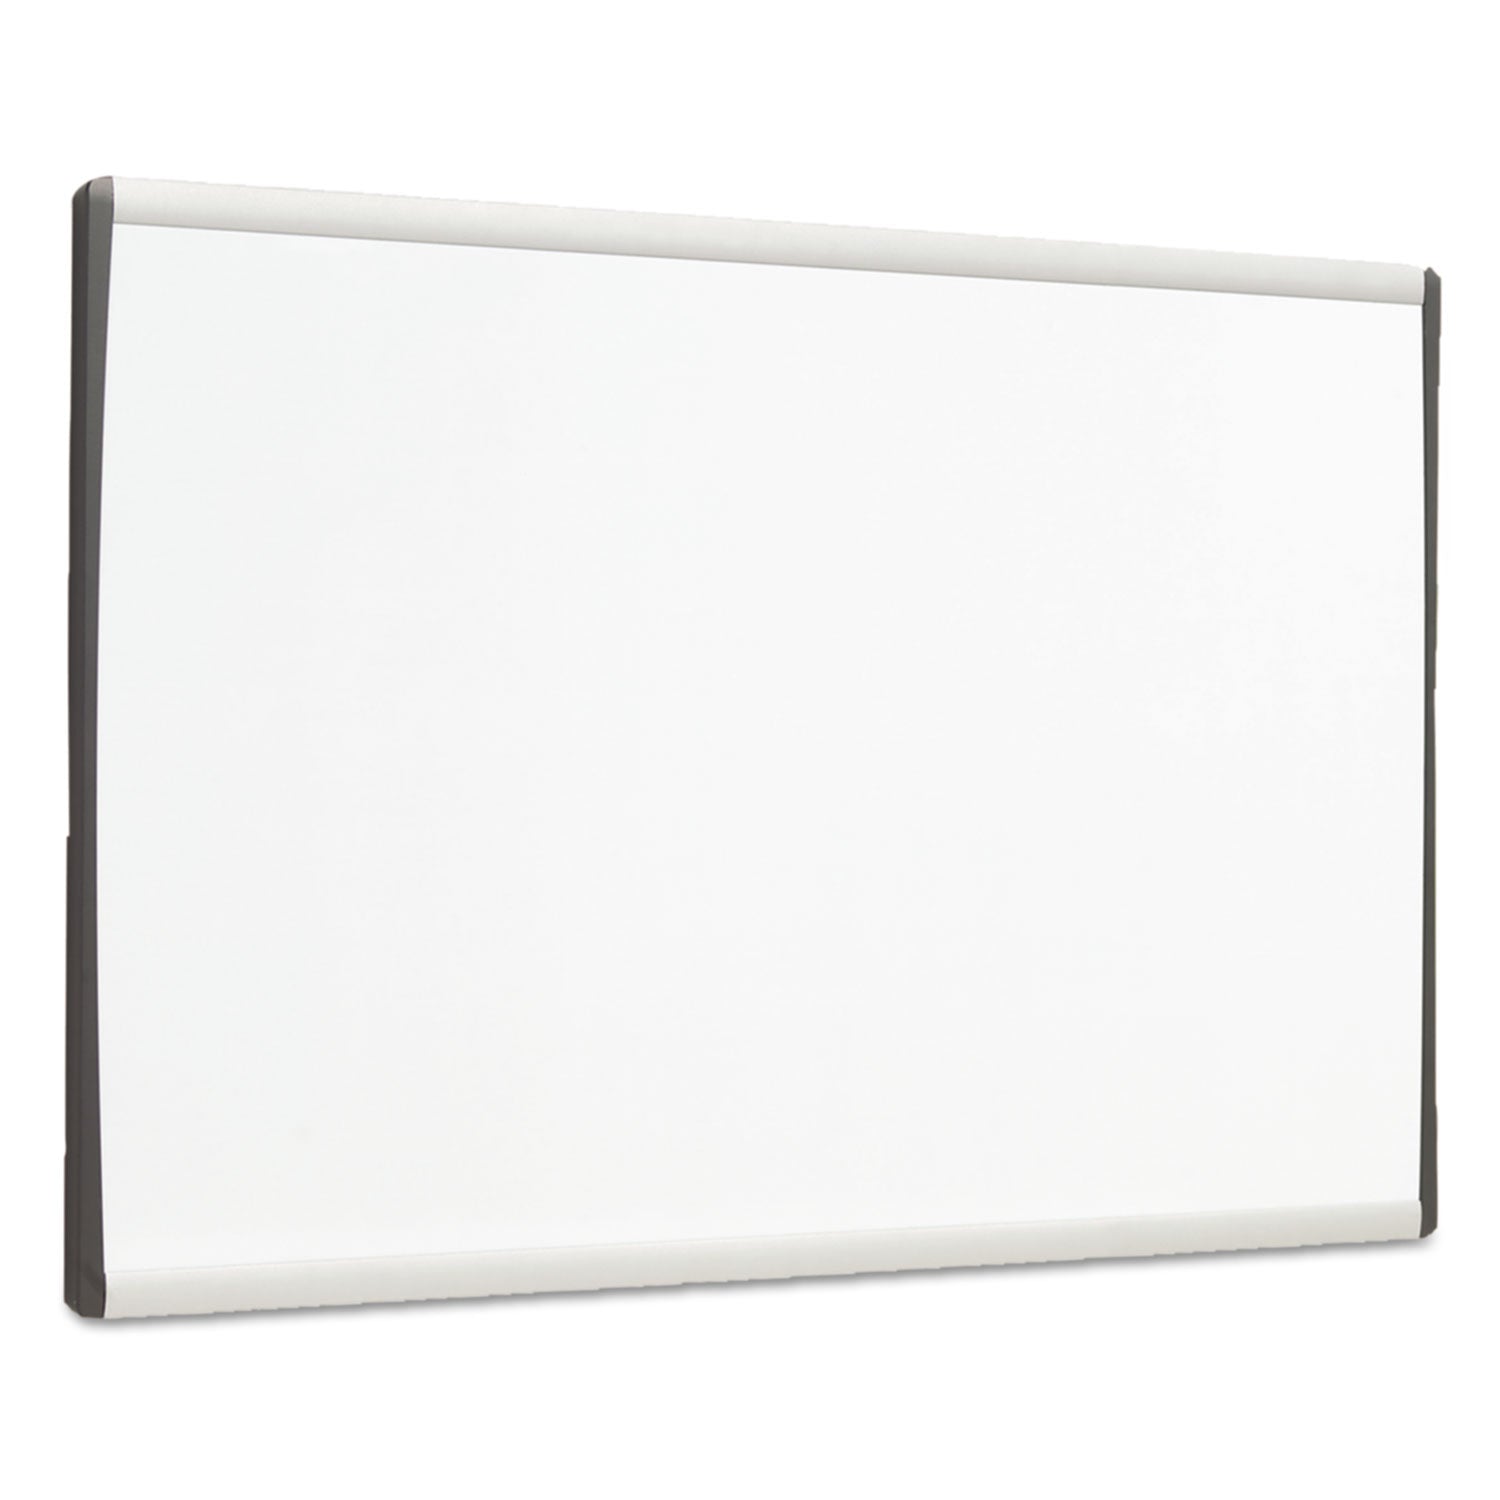 ARC Frame Cubicle Magnetic Dry Erase Board, 14 x 11, White Surface, Silver Aluminum Frame - 